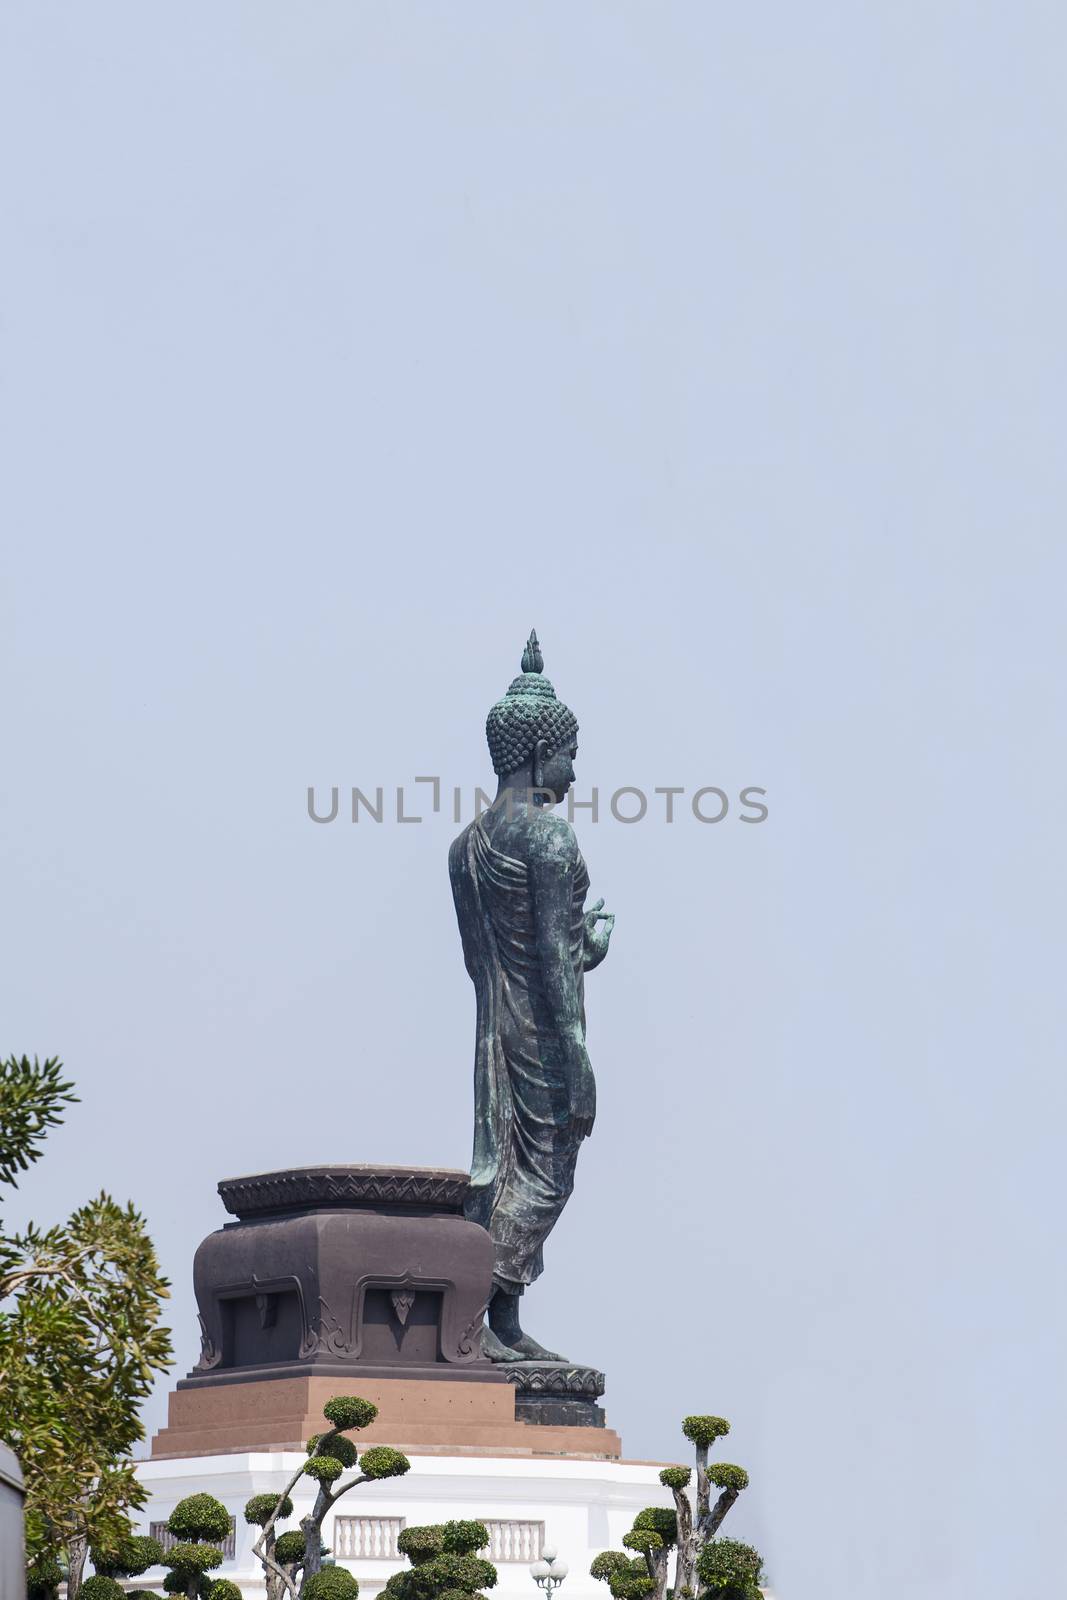 The old buddha statue. by jee1999